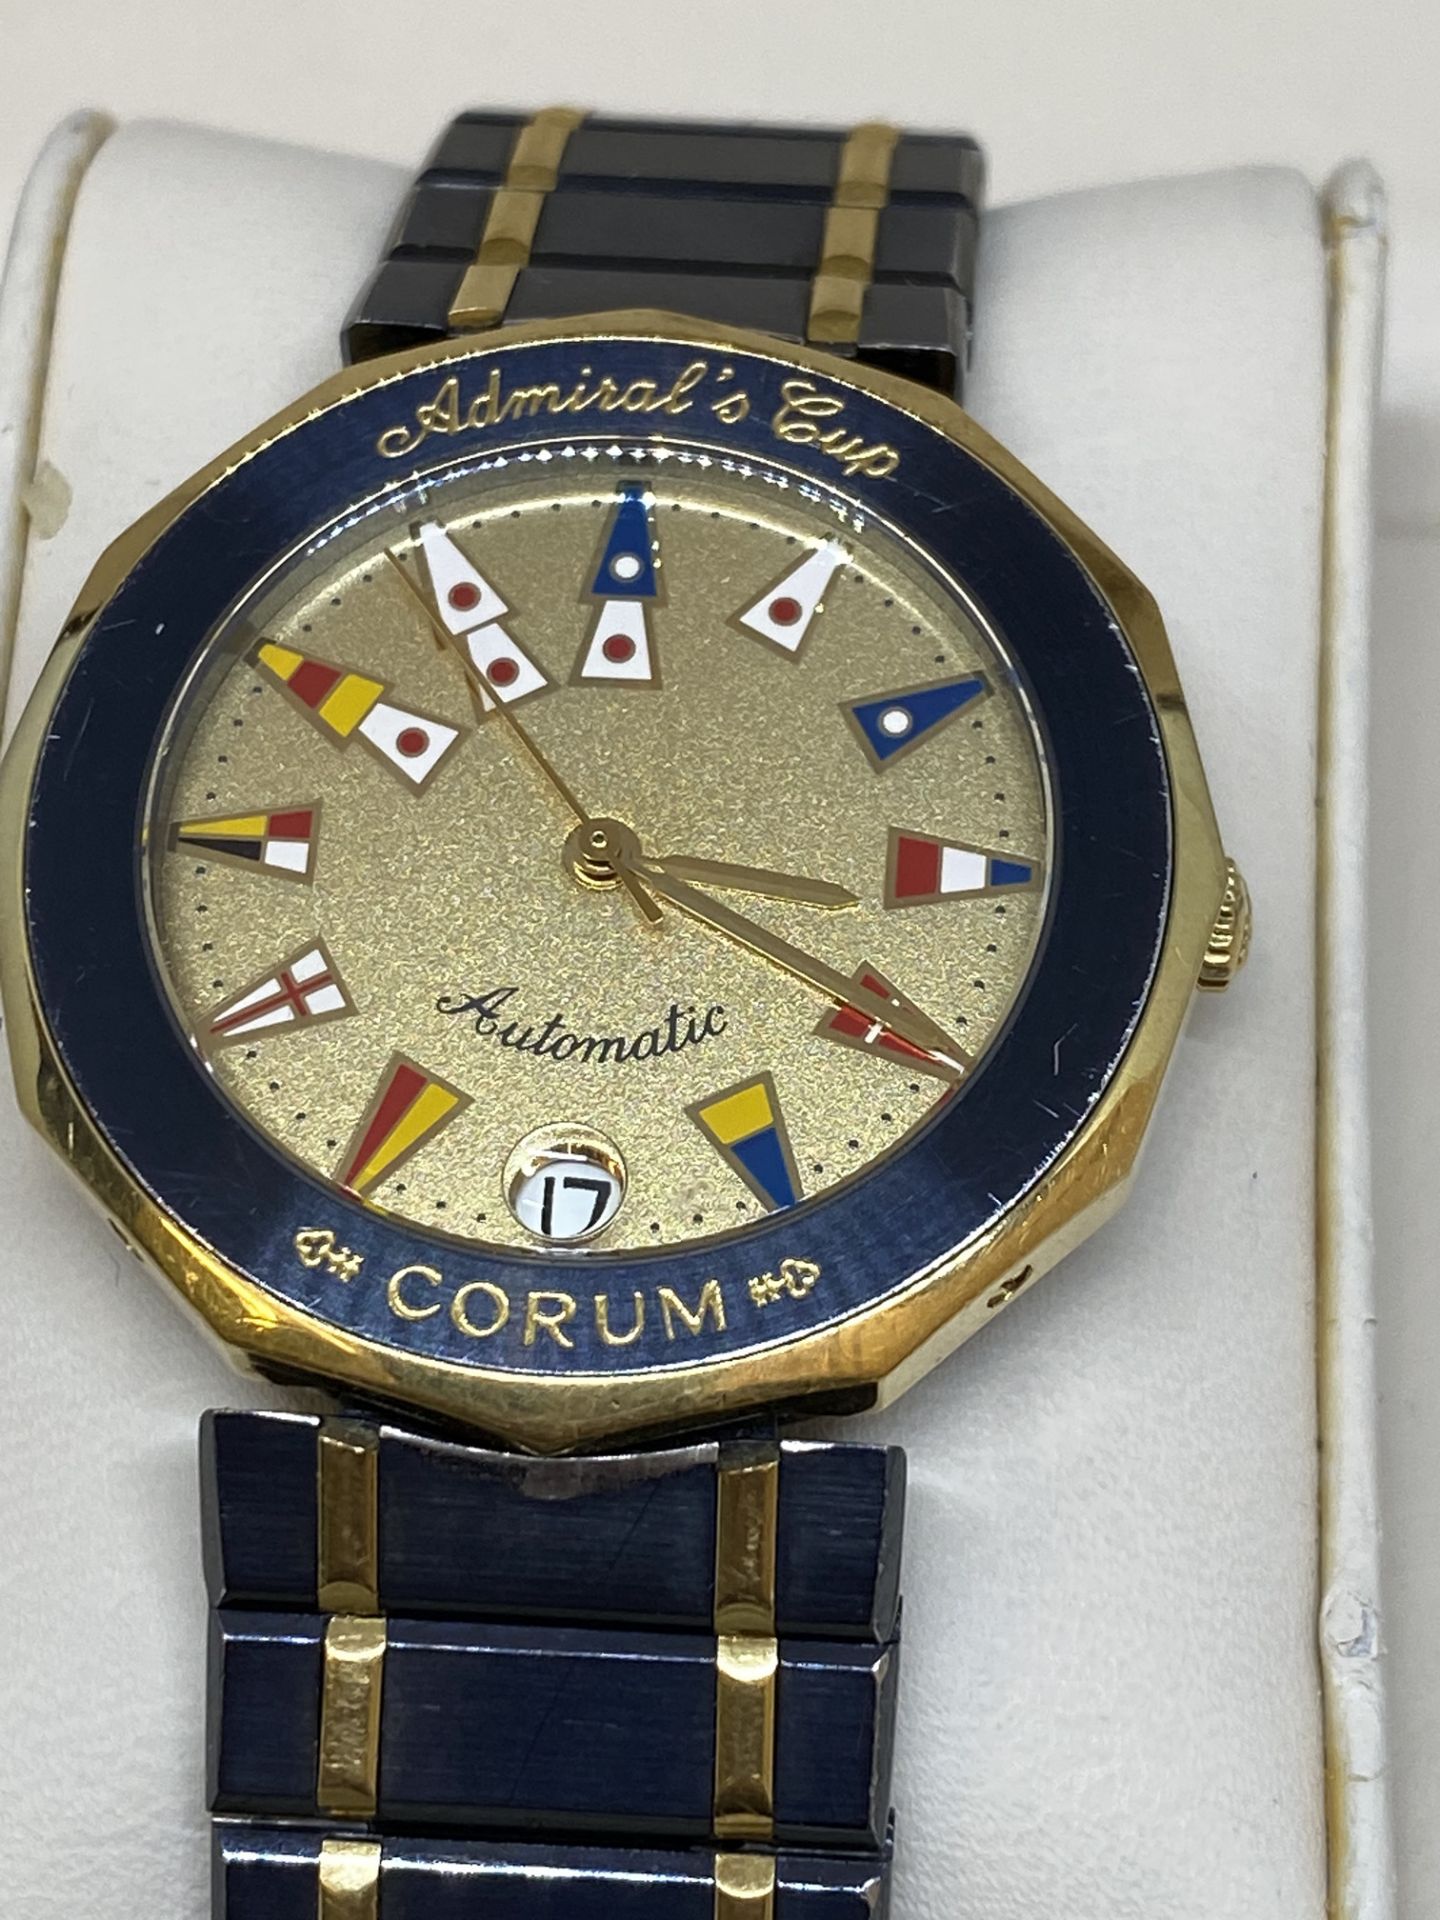 CORUM ADMIRALS CUP 18ct GOLD & S/STEEL AUTOMATIC WATCH - Image 4 of 13